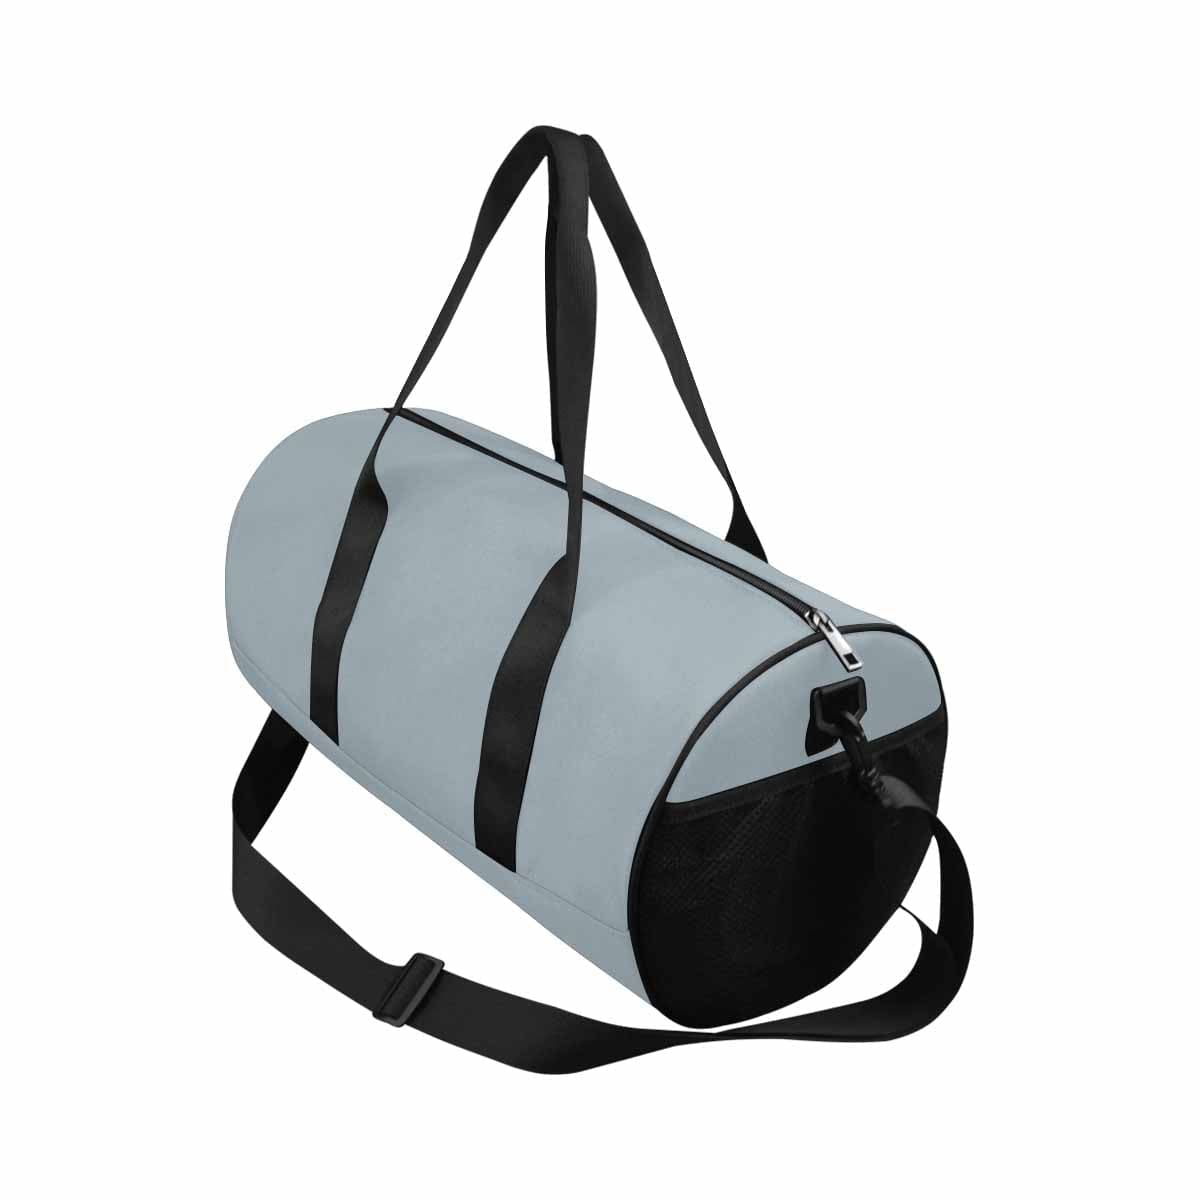 Travel Duffel Bag Misty Blue Gray Carry On - Bags | Duffel Bags